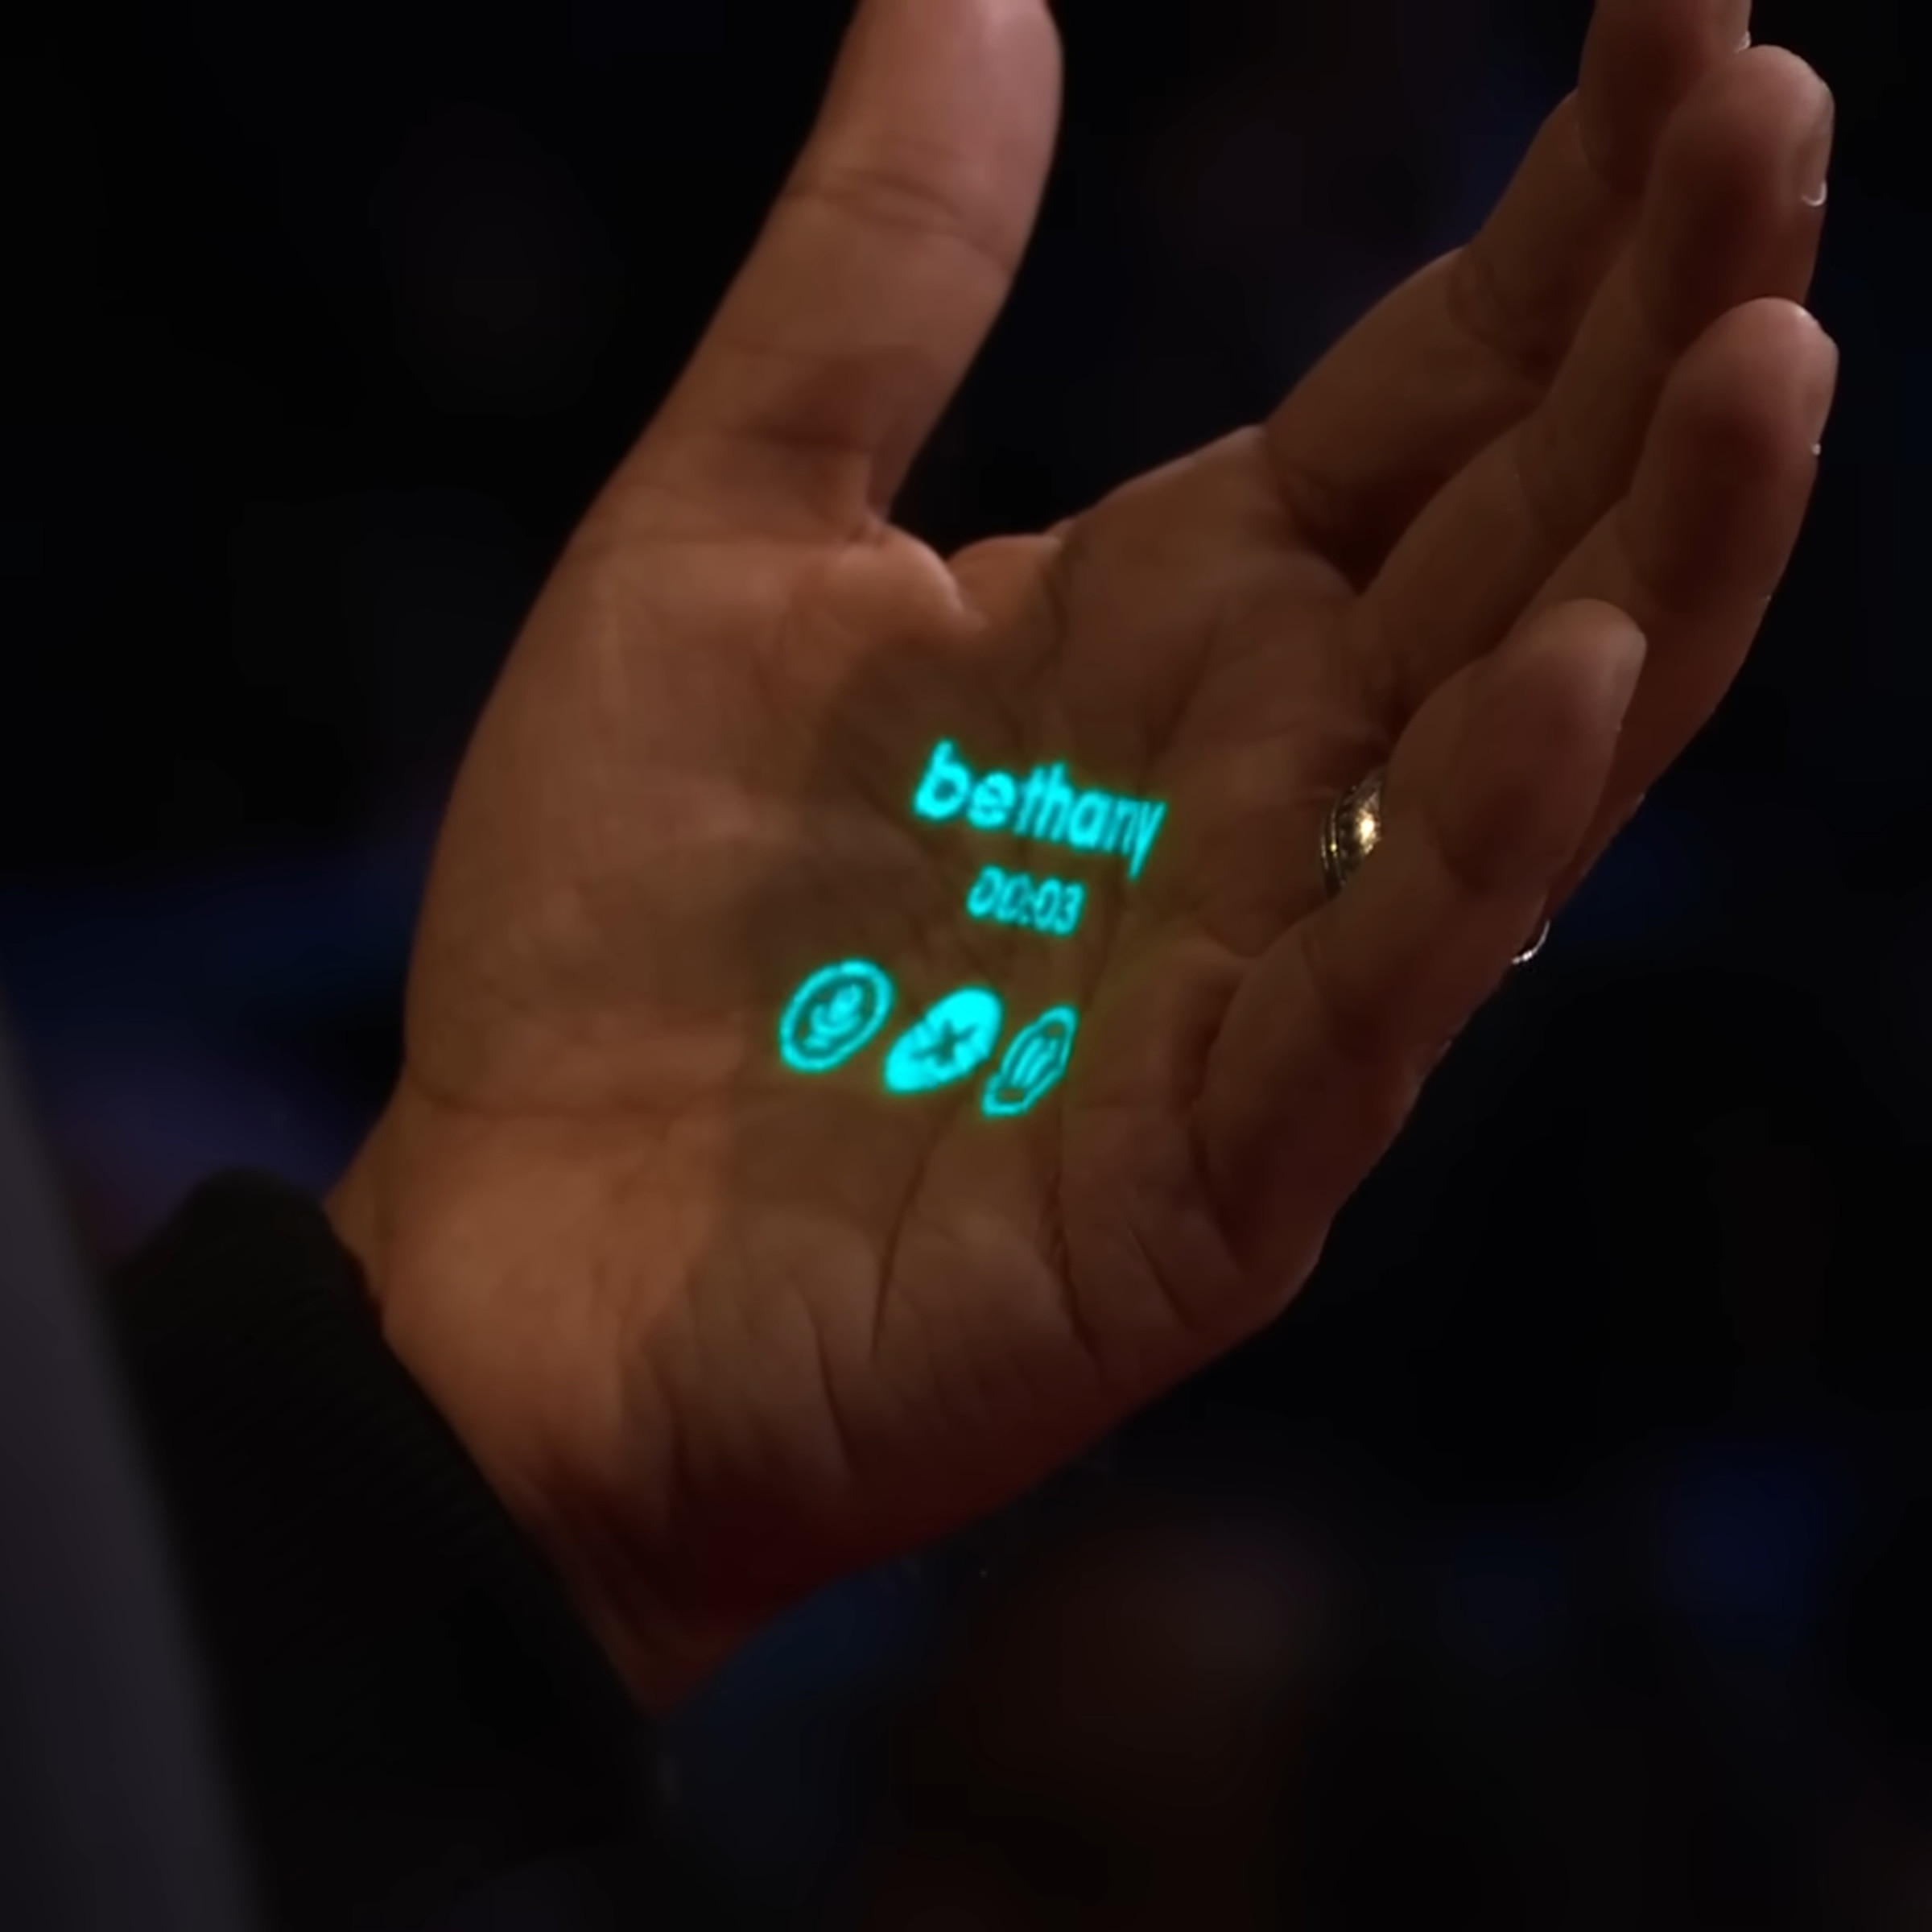 A photo from Imran Chaudhri’s TED talk about the Humane Ai Pin. The device projects details of a phone call onto his hand.